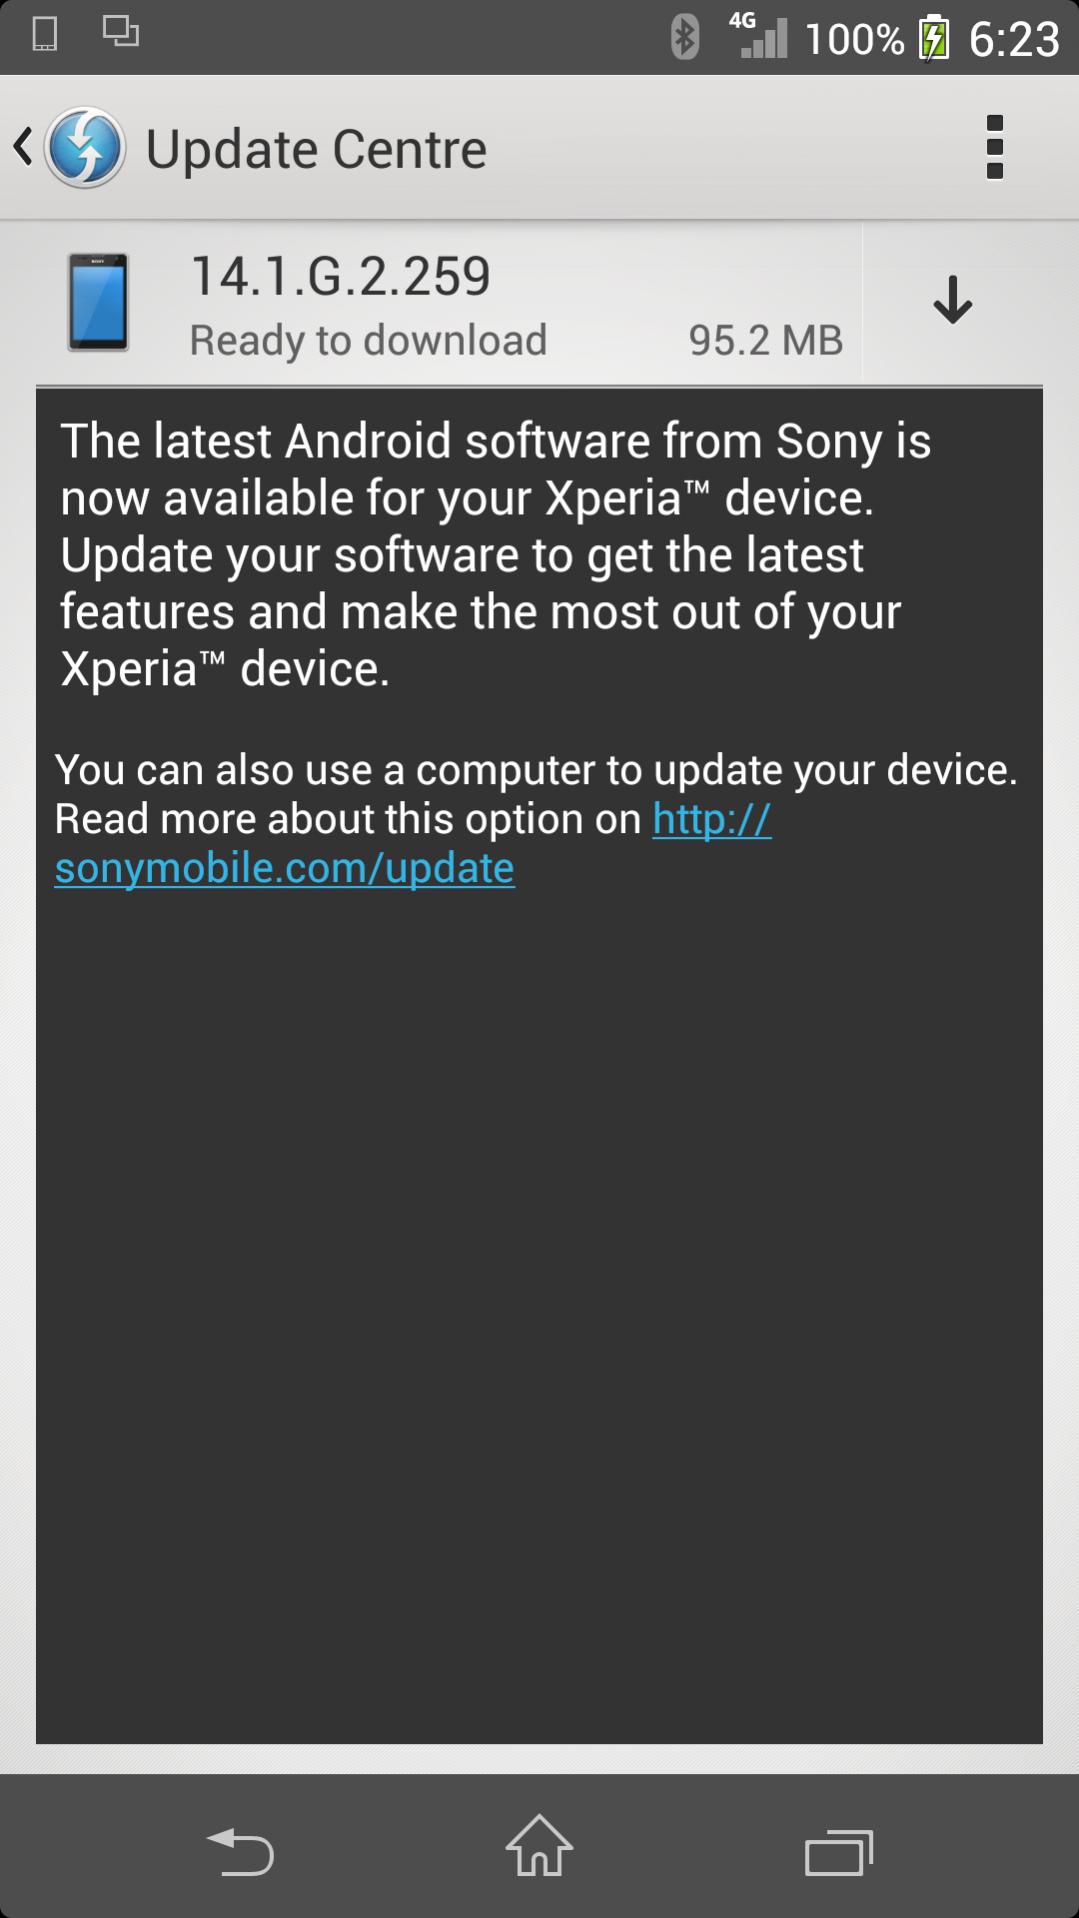 Carrier based Xperia Z1 14.1.G.2.259 firmware update rolling out